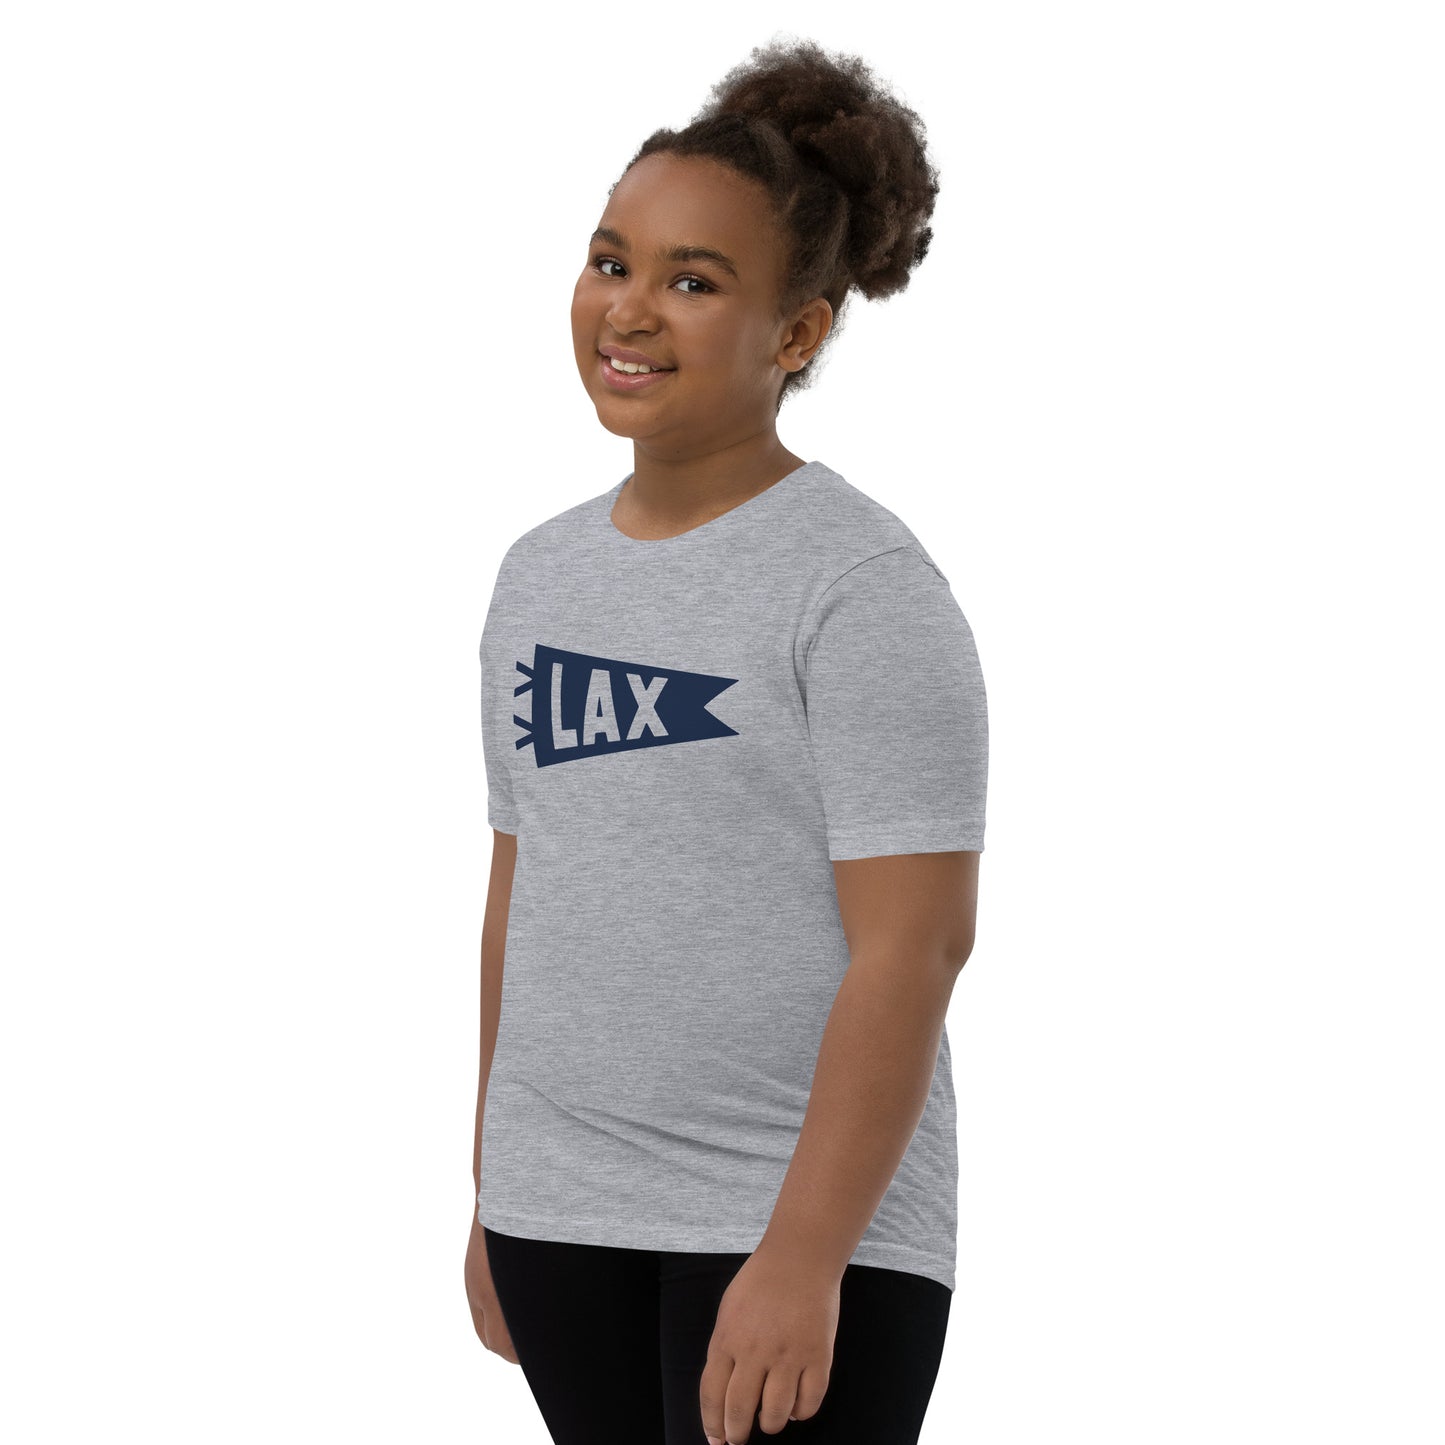 Kid's Airport Code Tee - Navy Blue Graphic • LAX Los Angeles • YHM Designs - Image 04